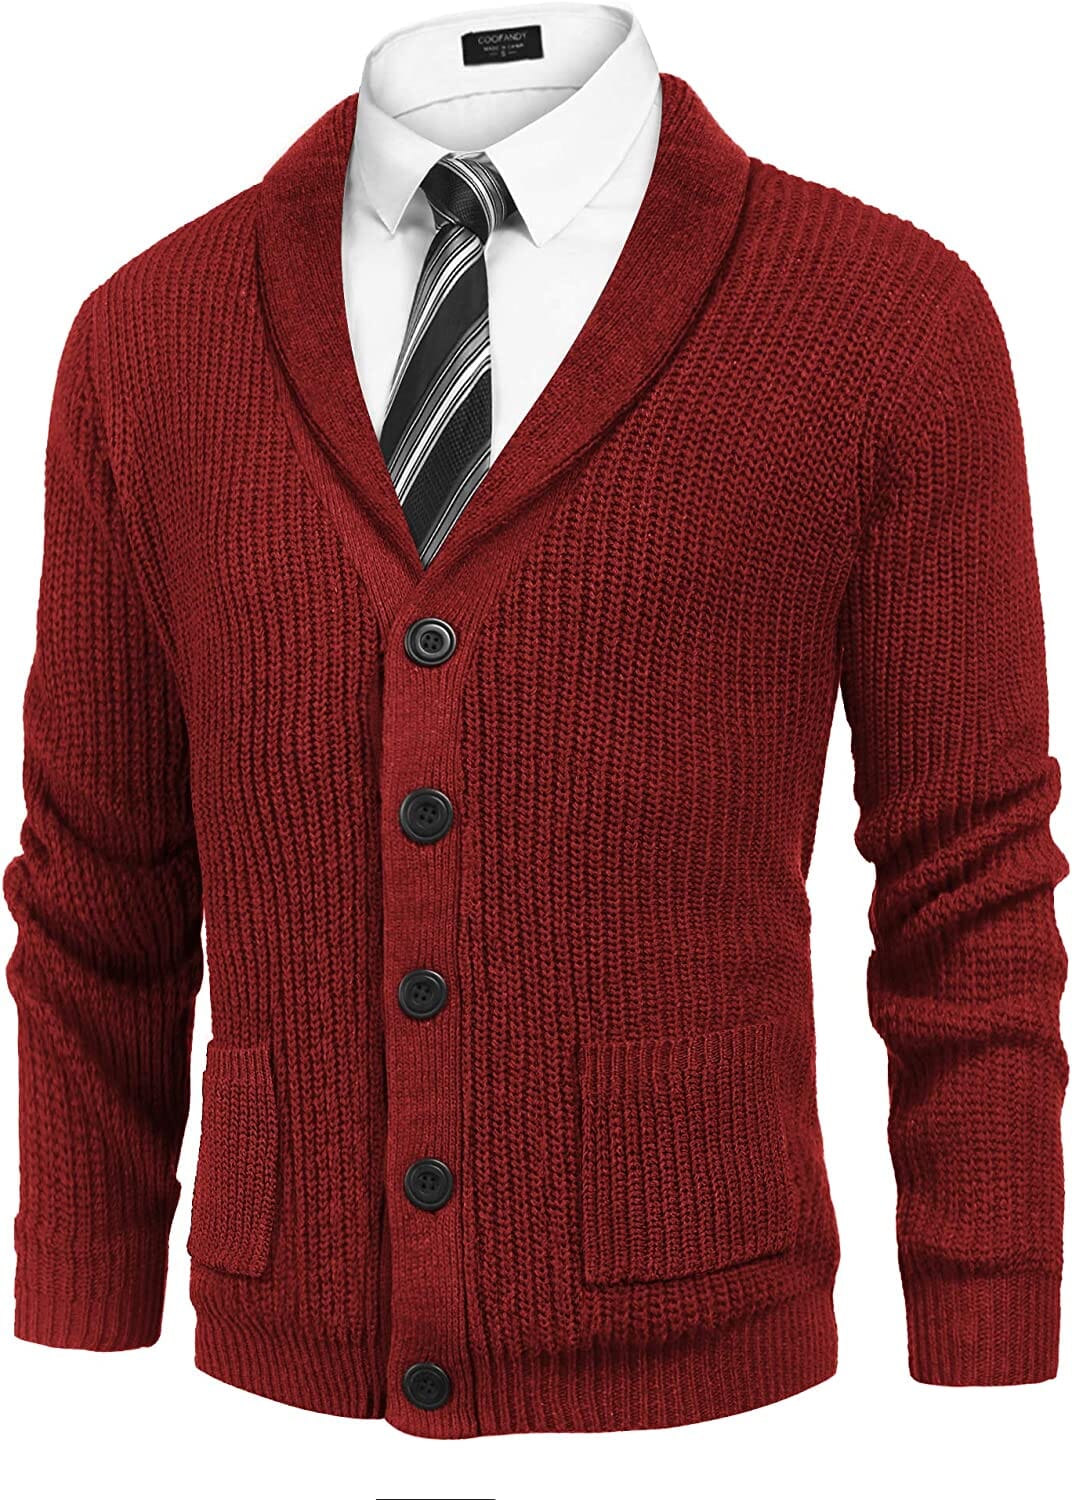 Lapel Button Up Cable Knit Cardigan with Pockets (US Only) Cardigans COOFANDY Store Wine Red S 